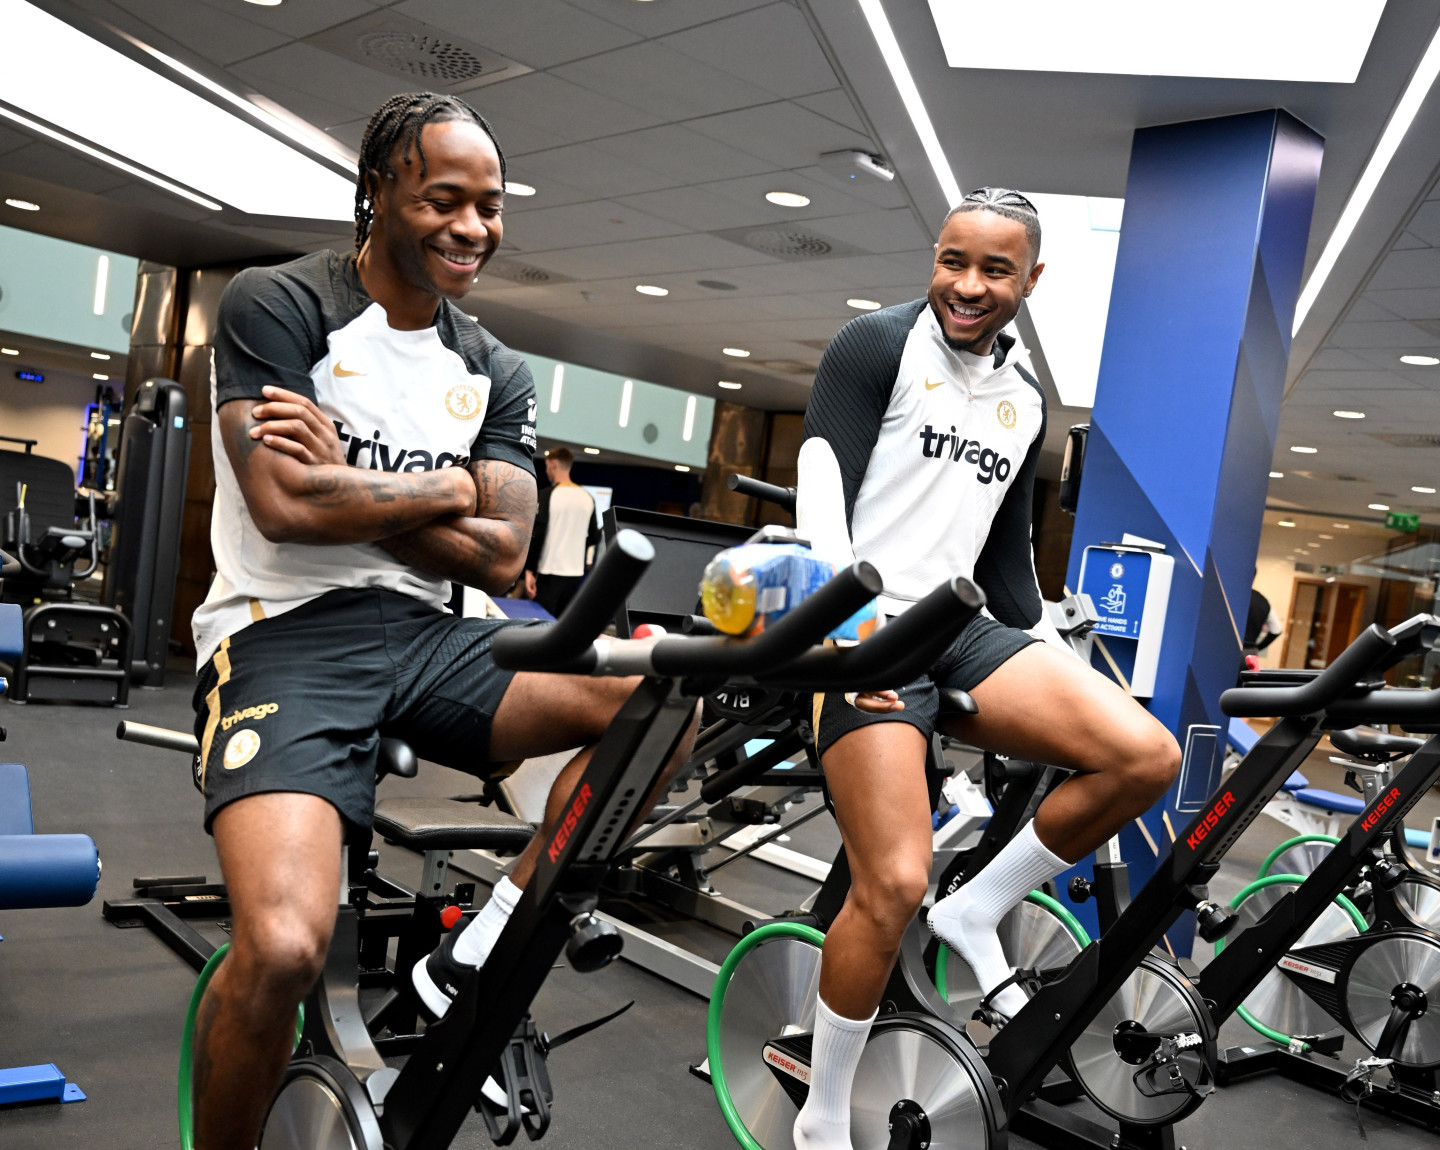 Five from training: Recovery in the gym, News, Official Site